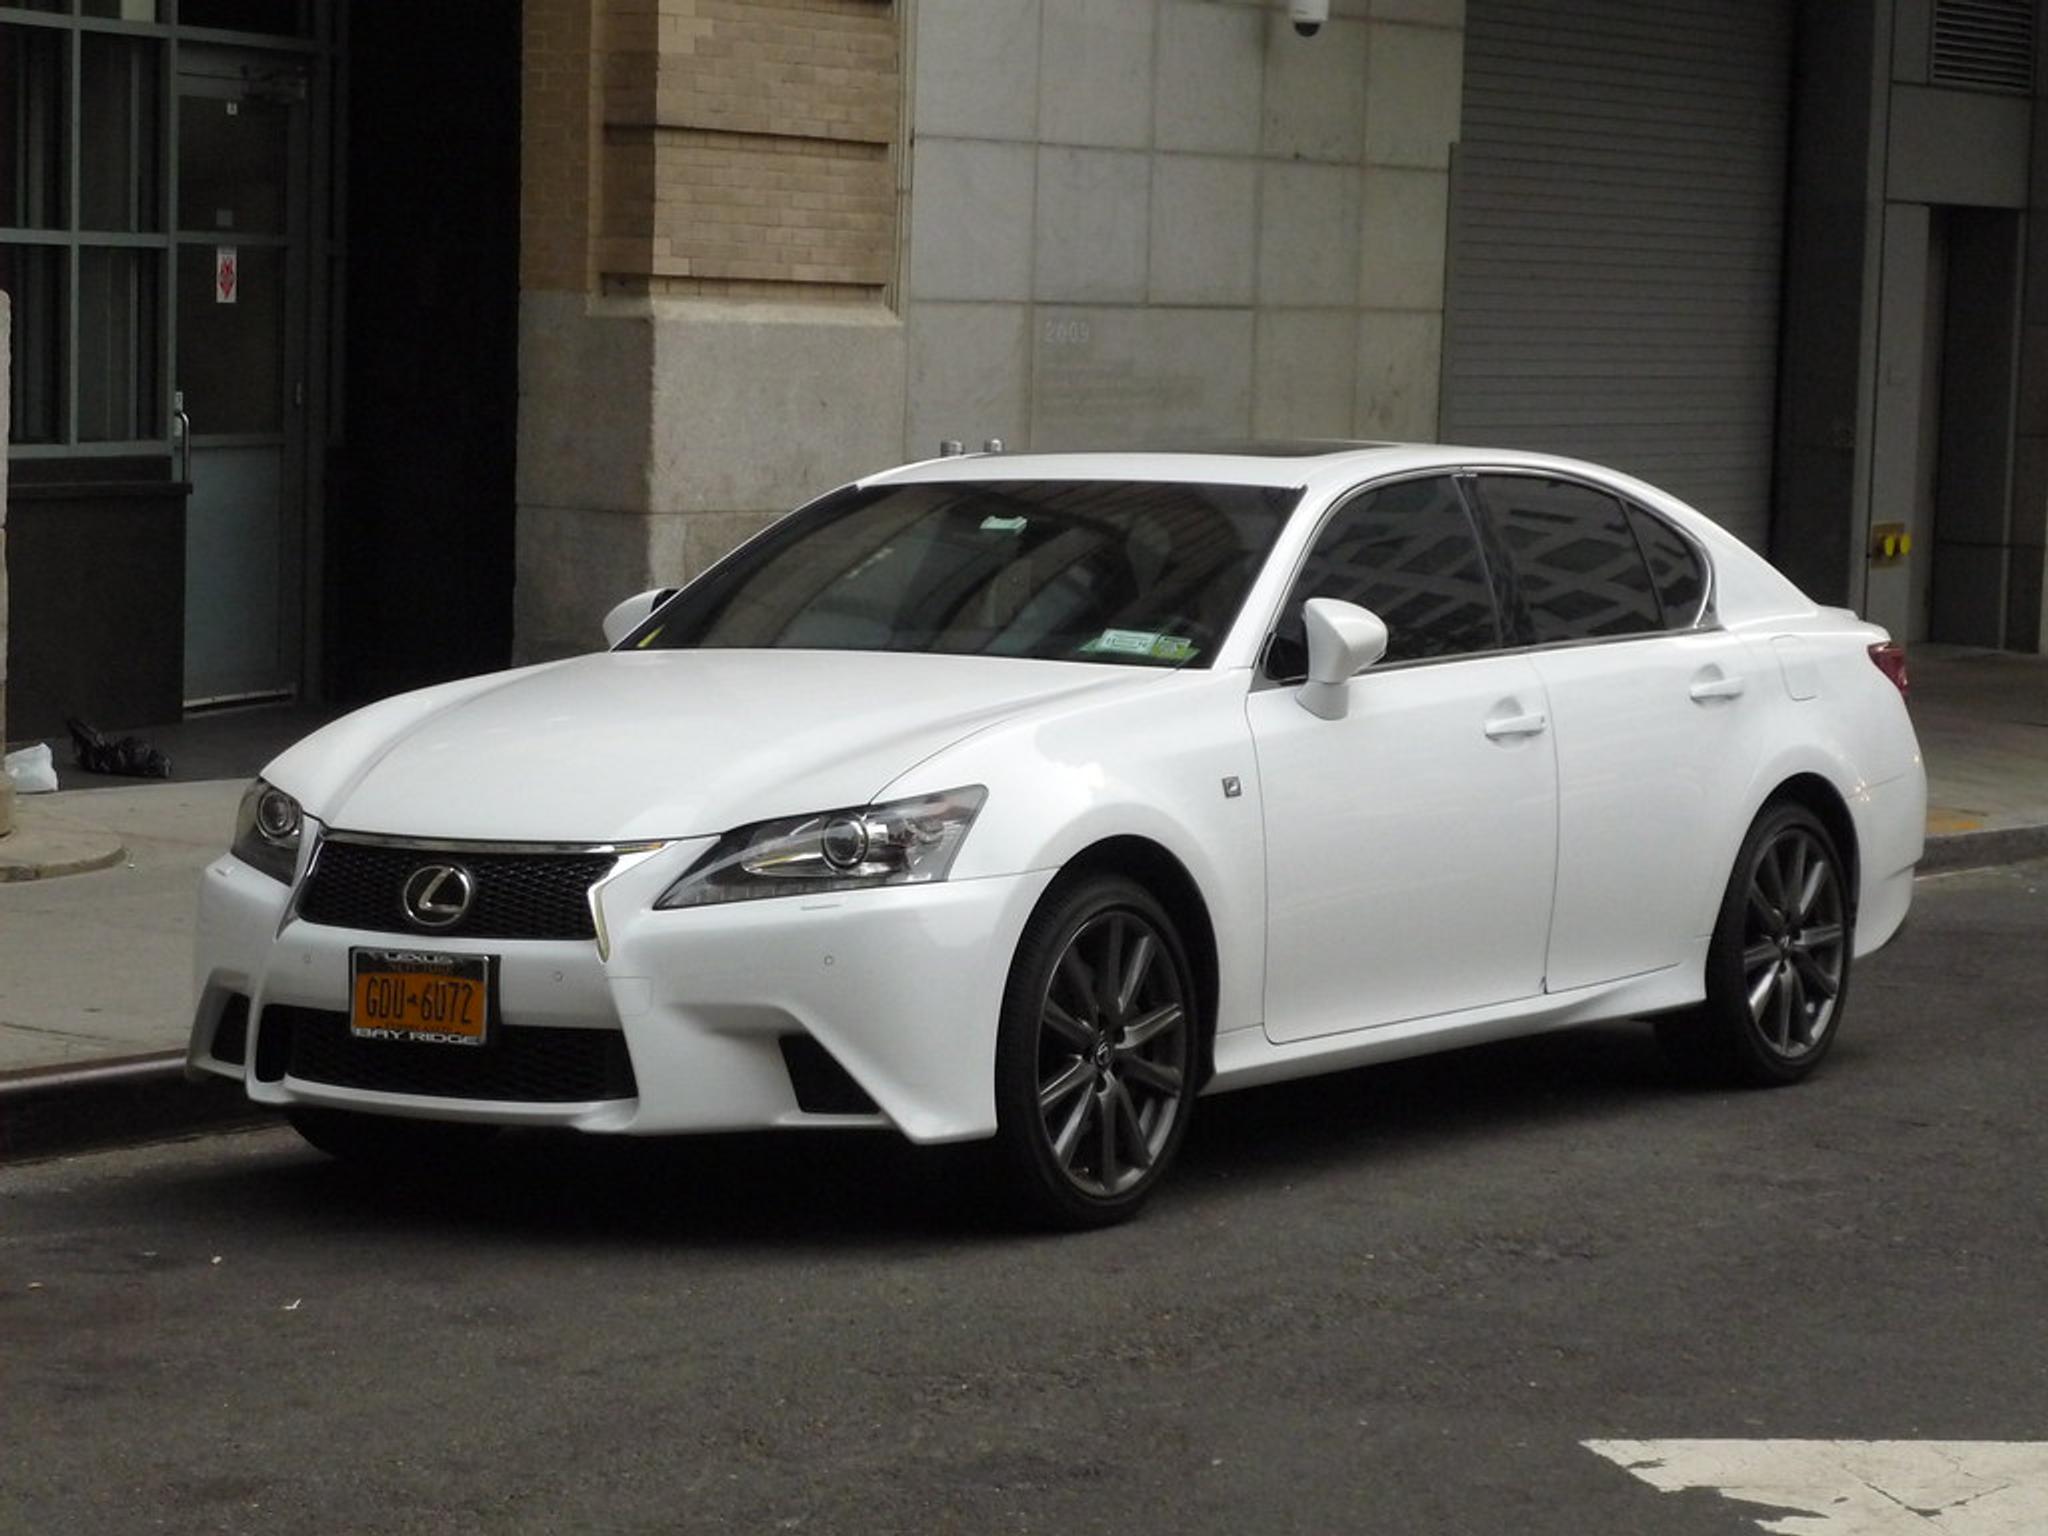 White Lexus GS parked by the side of the road